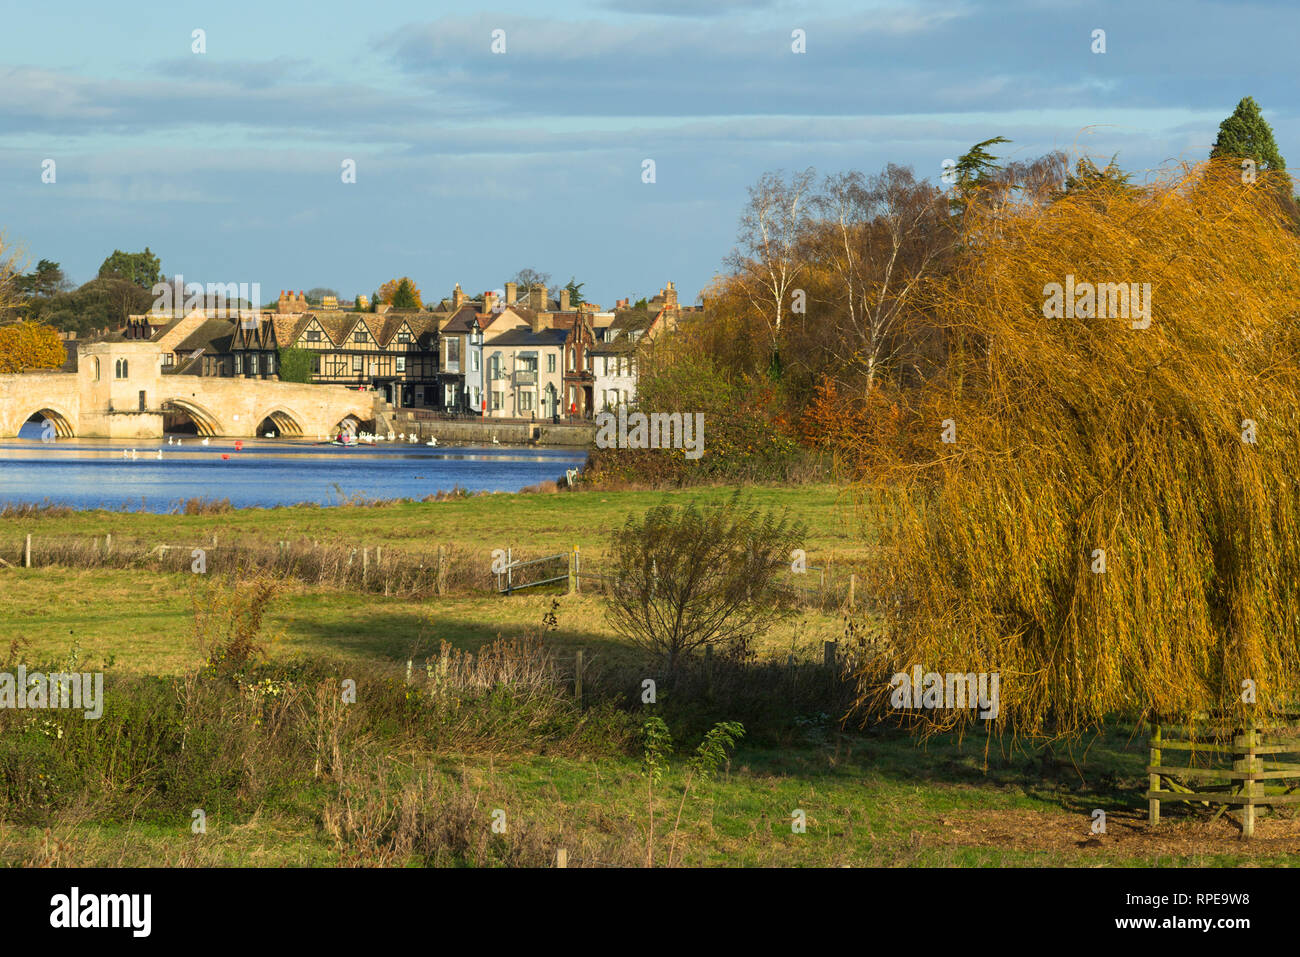 River Great Ouse with the medieval St Leger Chapel Bridge at St Ives, Cambridgeshire, England, UK. Stock Photo